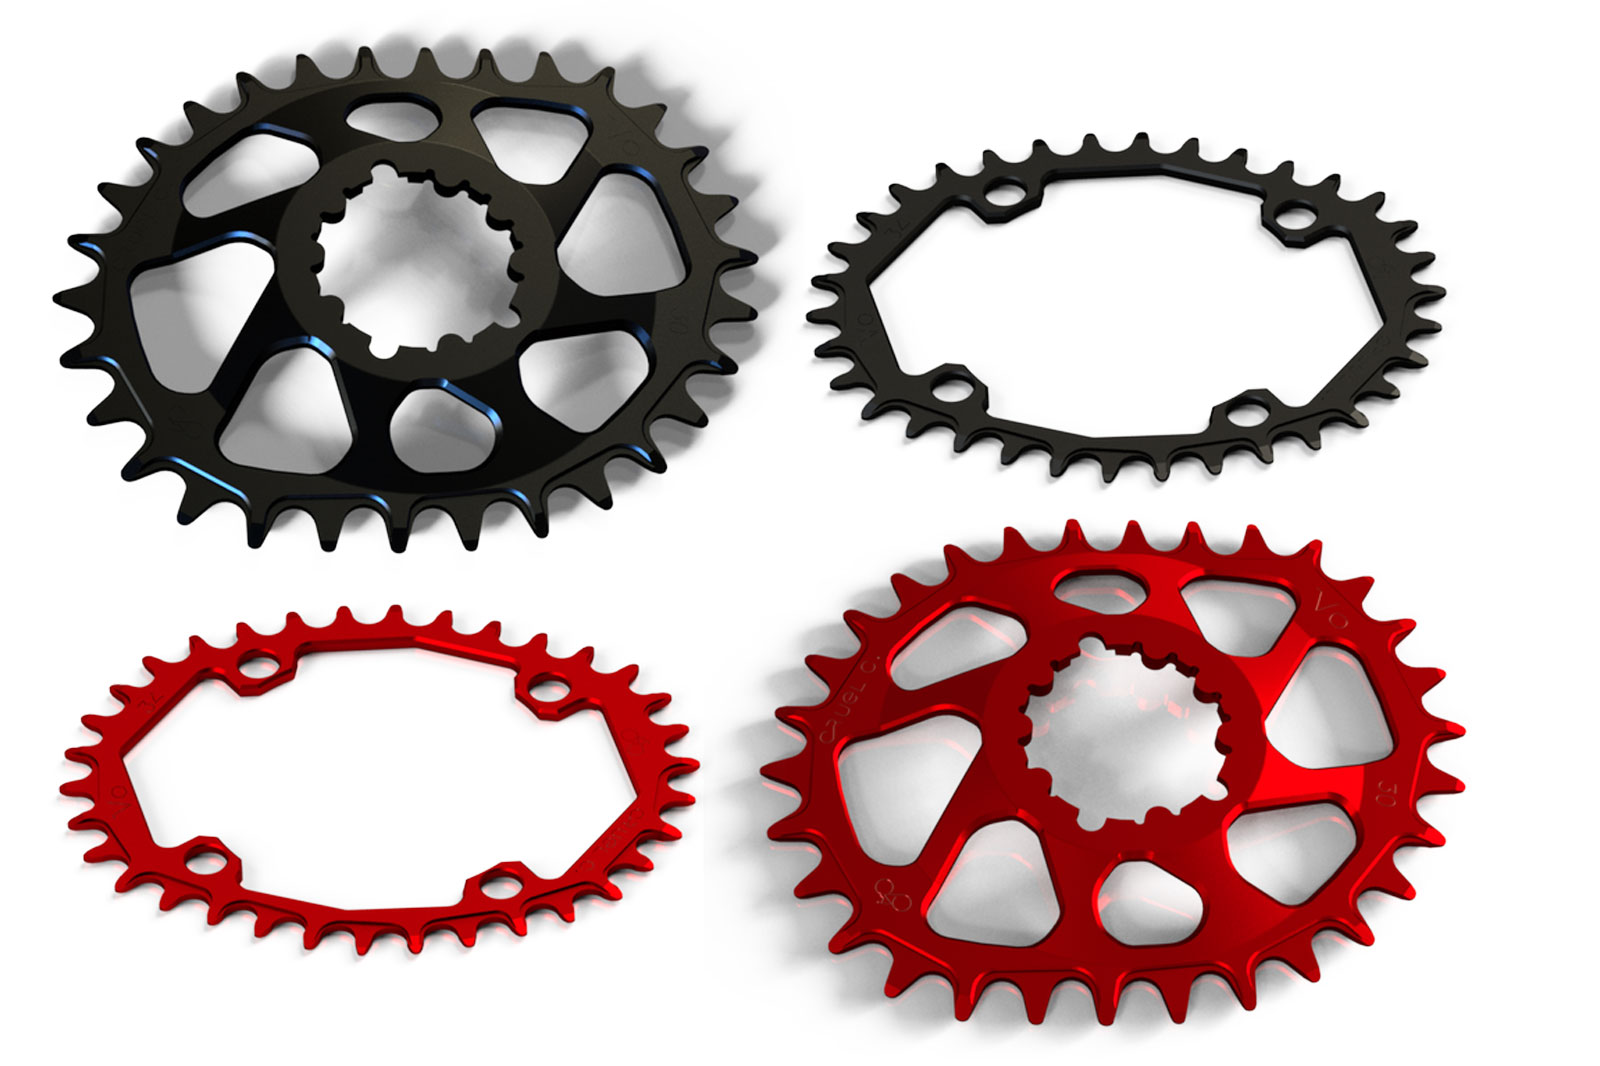 cruel components vo series double cam chainrings osymmetric oval ovoid rings mtb direct mount bcd spider